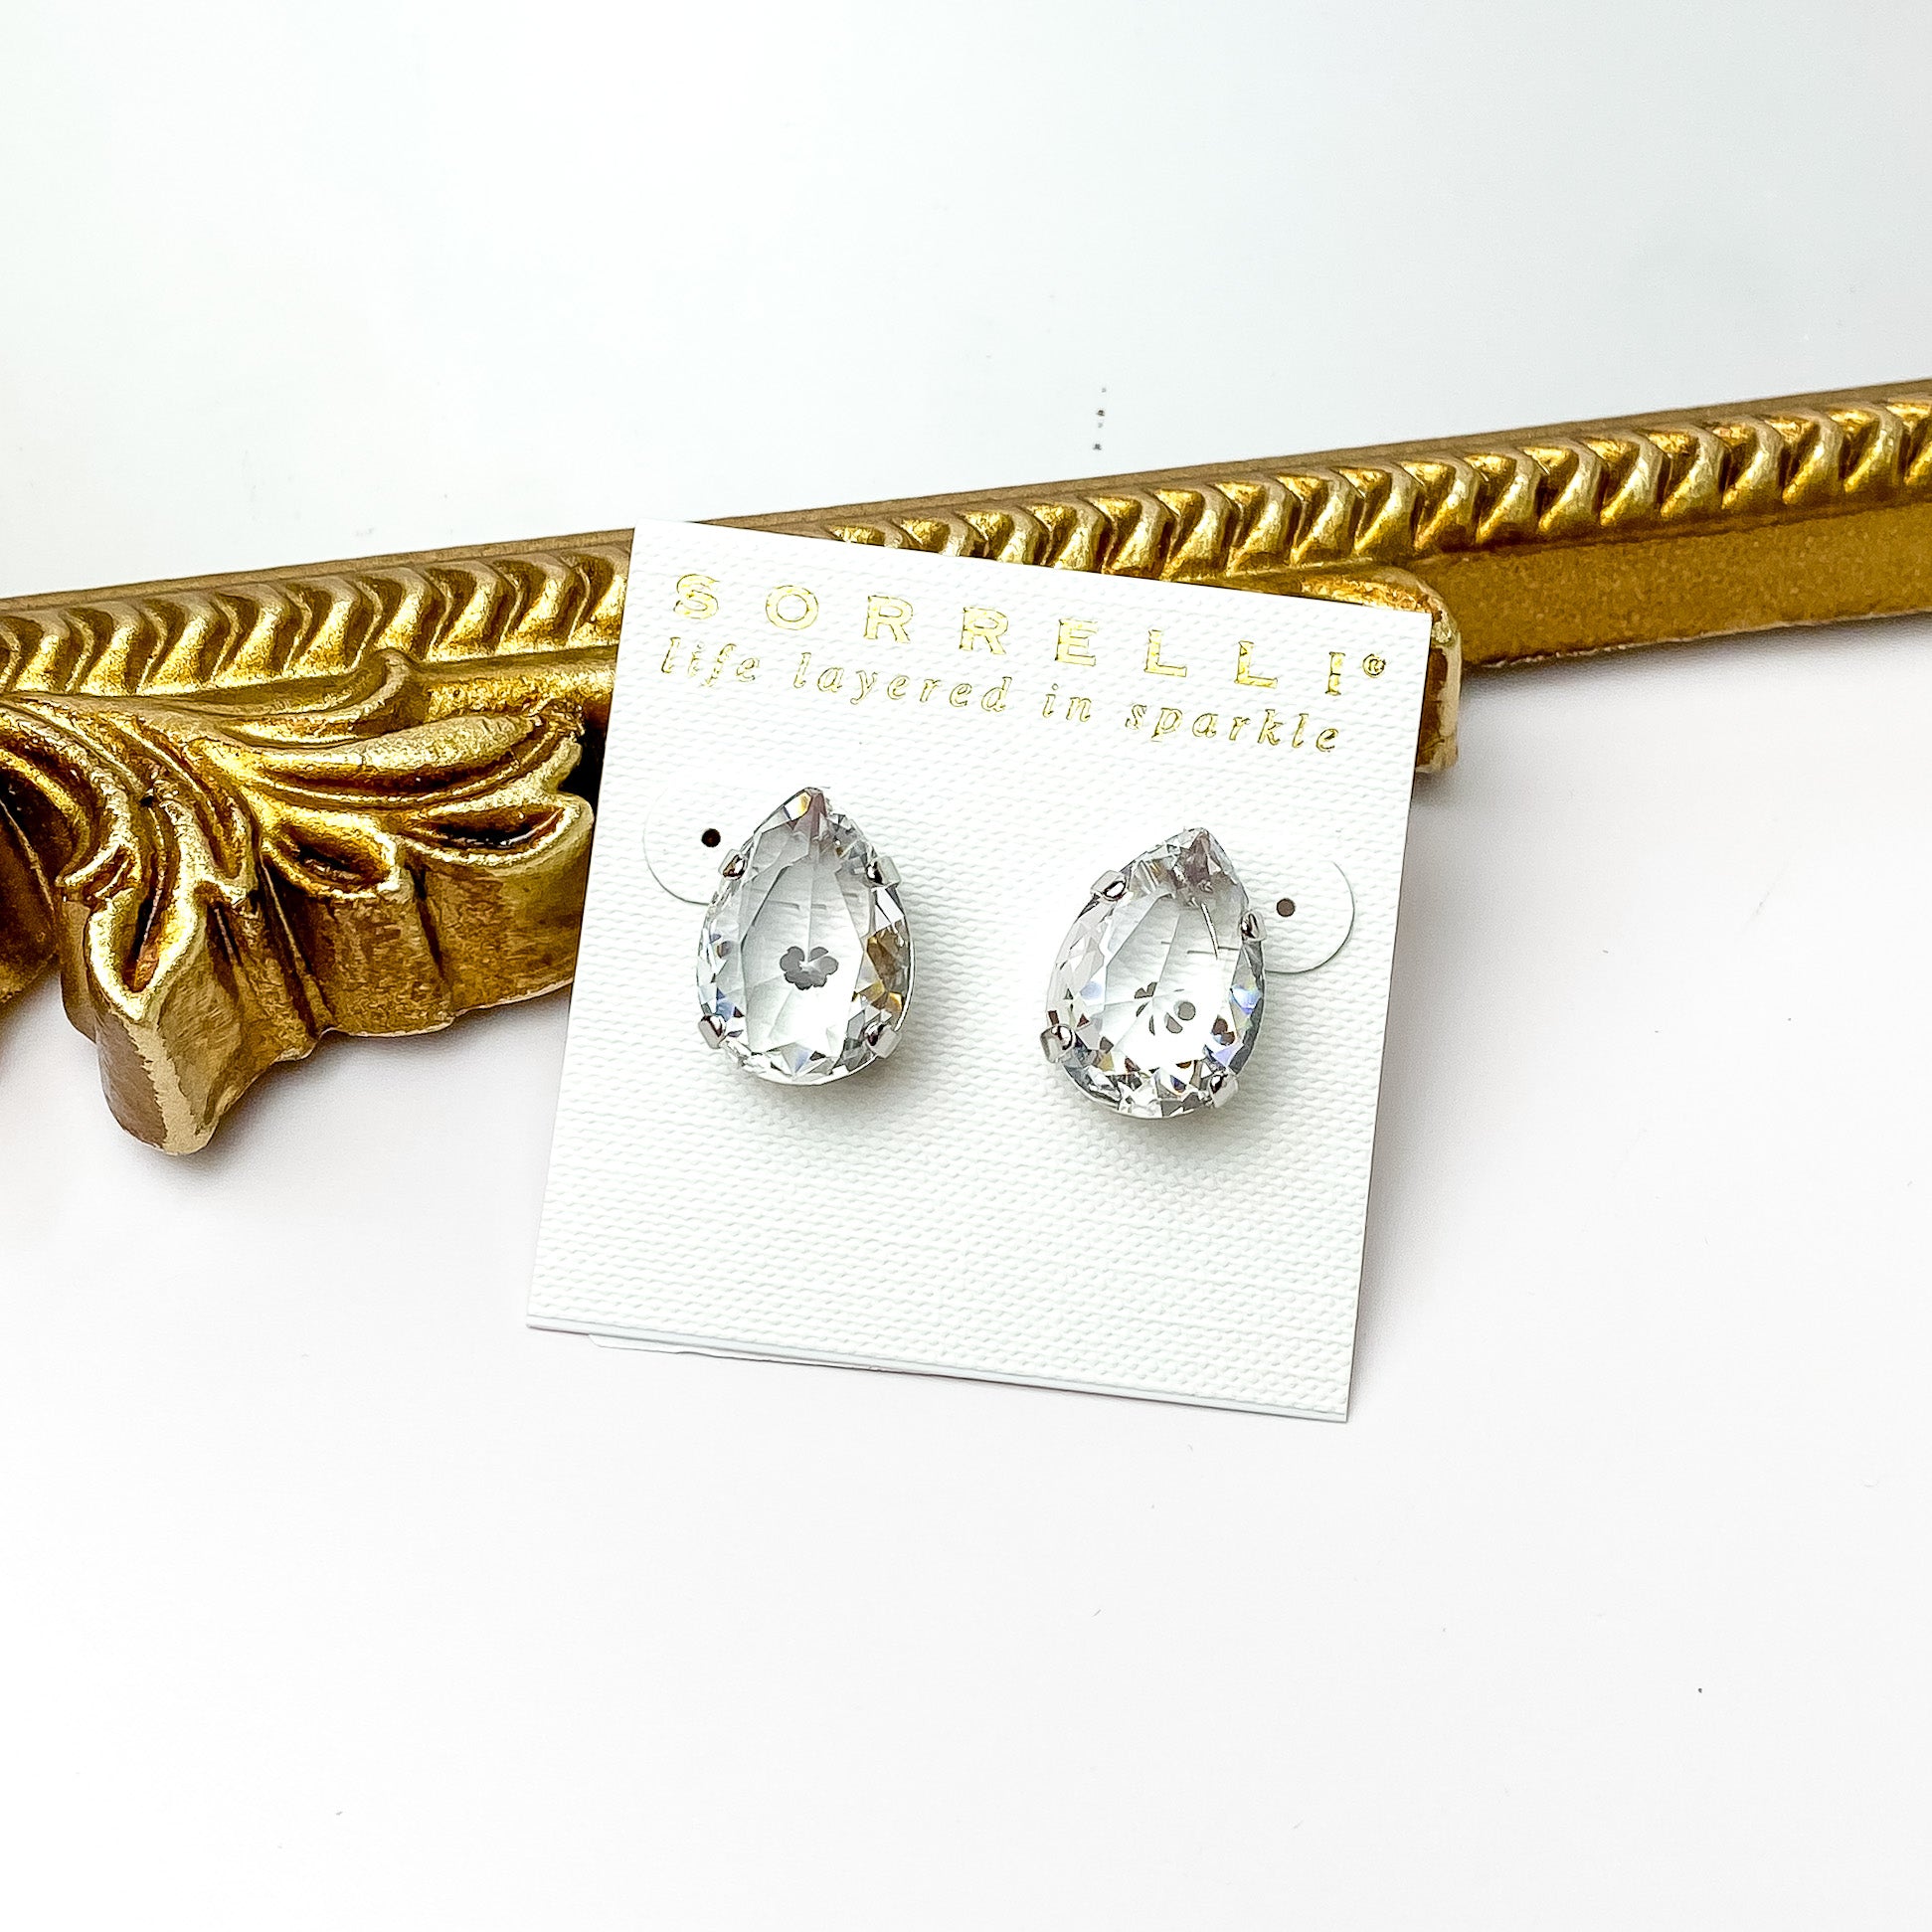 Single clear crystal stud earrings with a silver backing. Pictured on a white background with a gold figure through the middle